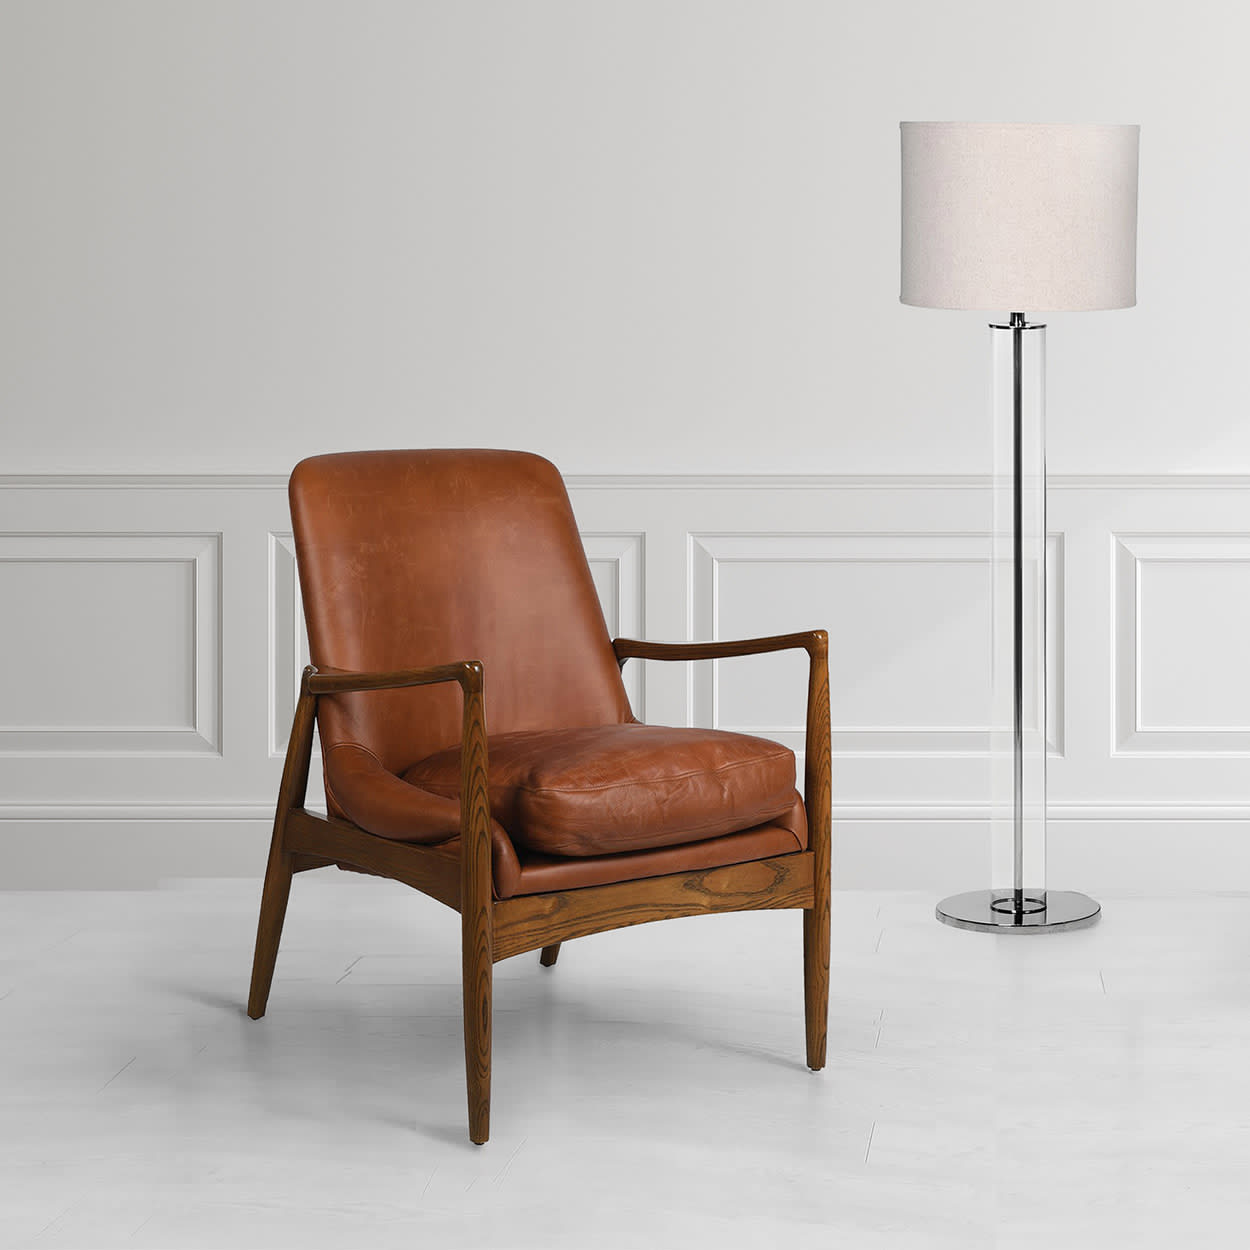 Tan Leather Armchair with Wooden Frame